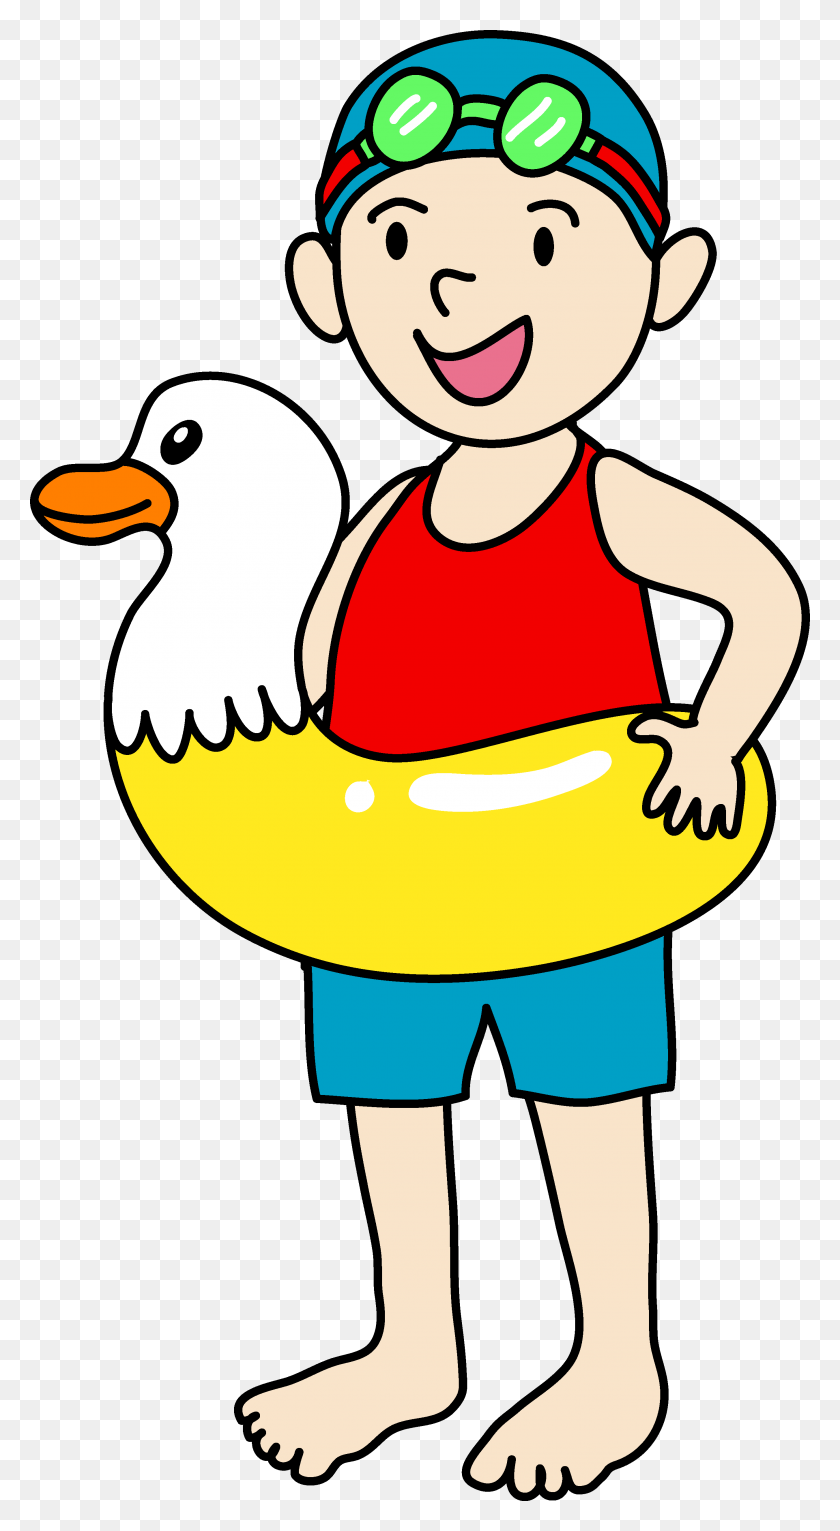 2703x5101 Free Swimming Clipart Free Clipart Images Graphics Animated Image - Free Swimming Pool Clipart